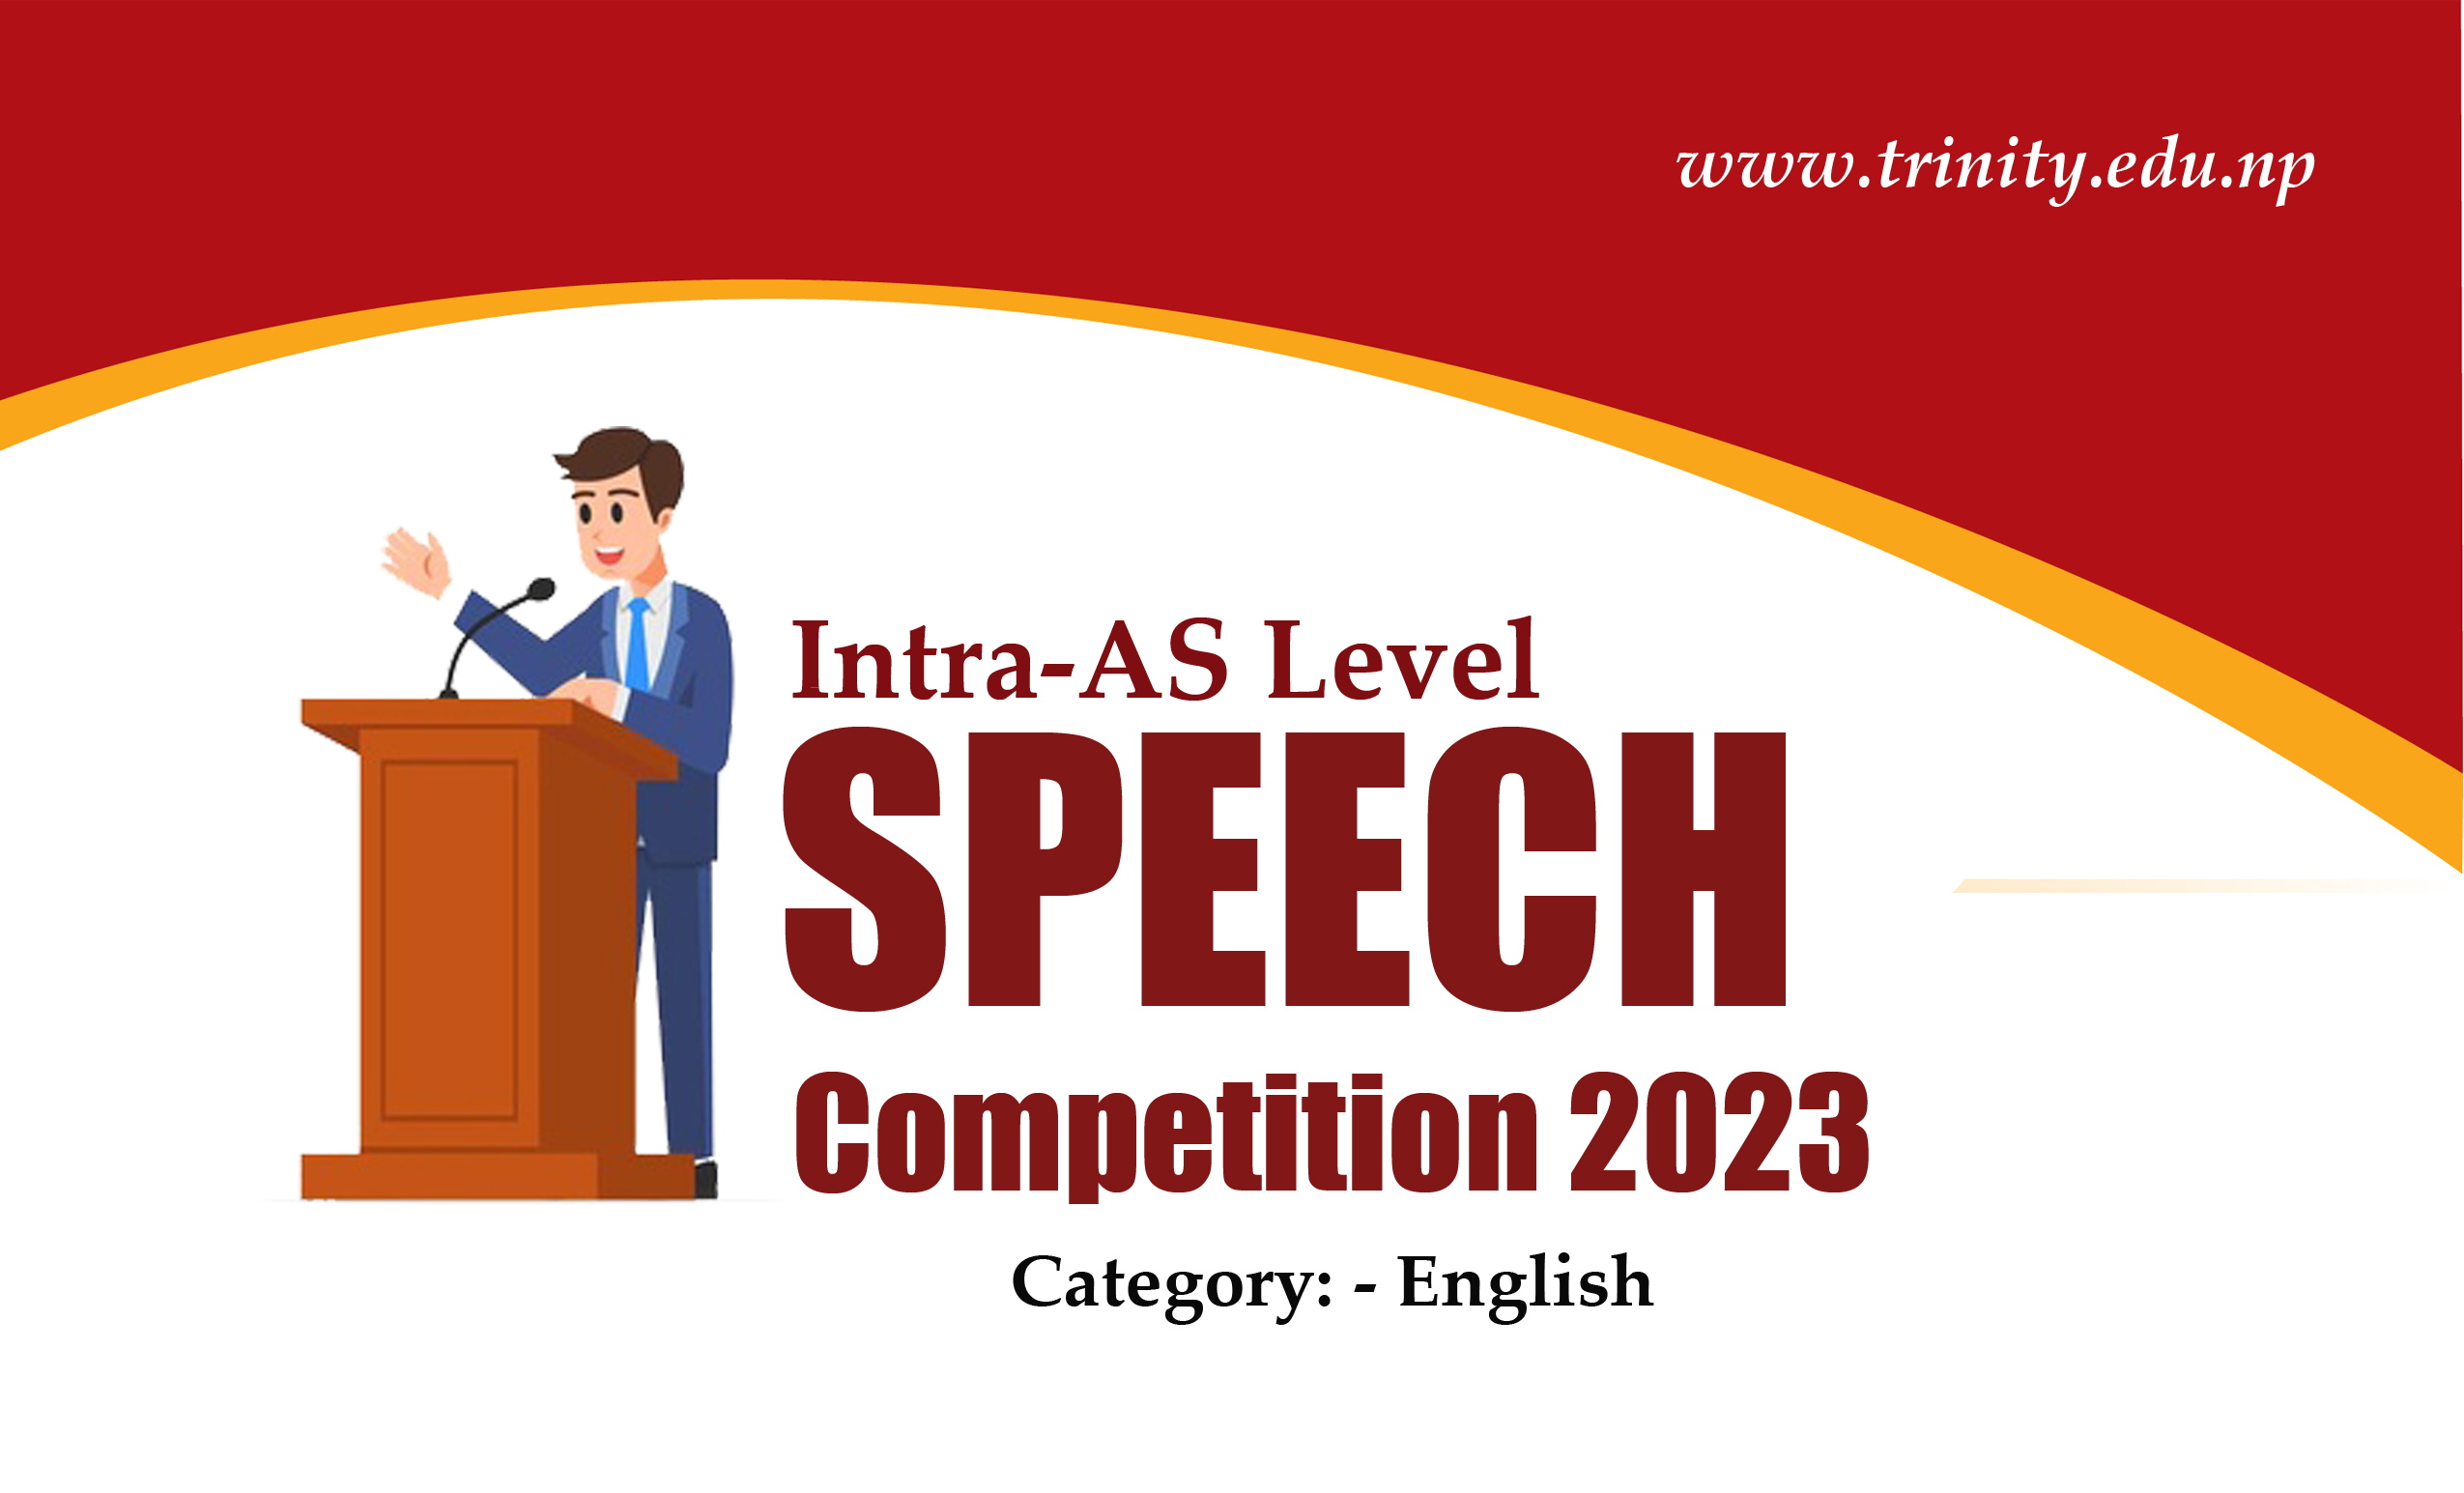 Intra-AS Level Speech Competition 2023